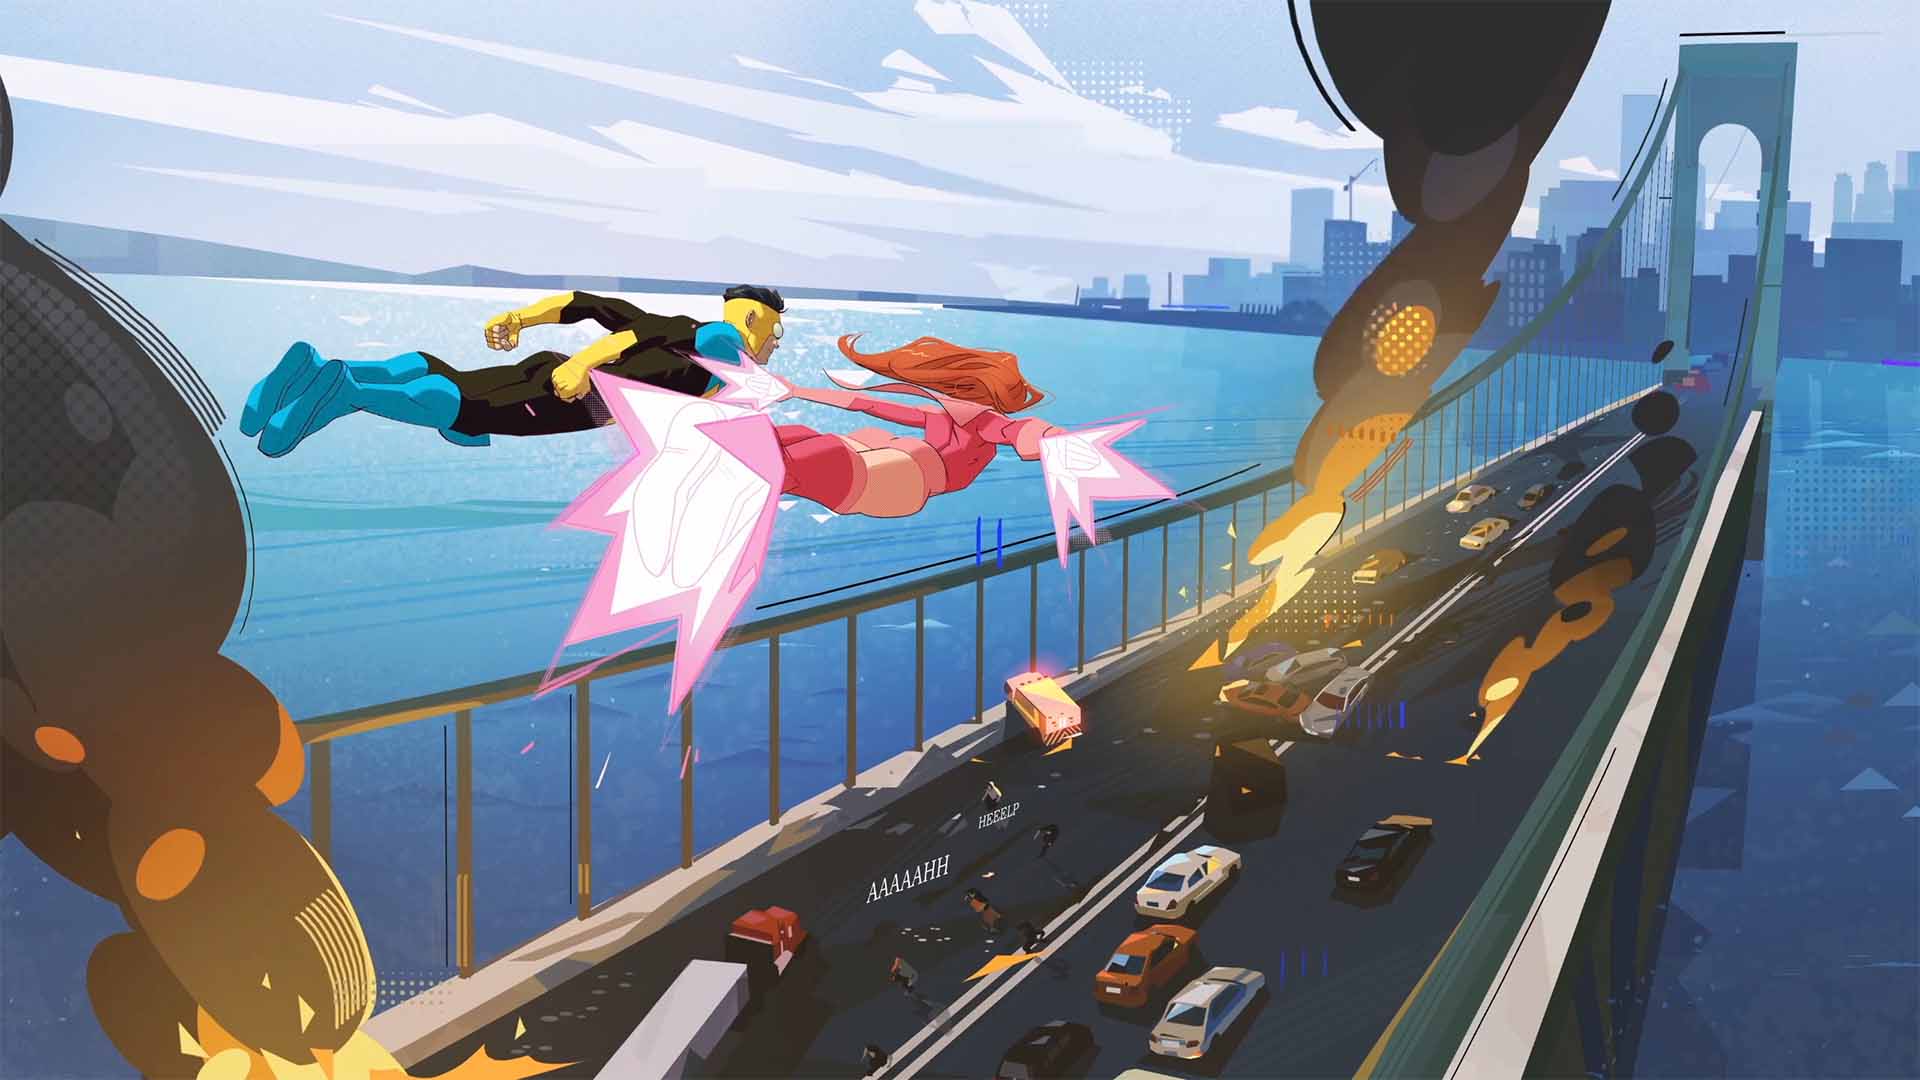 Comic-turned-TV show Invincible's first PC game will be 'visual novel RPG'  Atom Eve